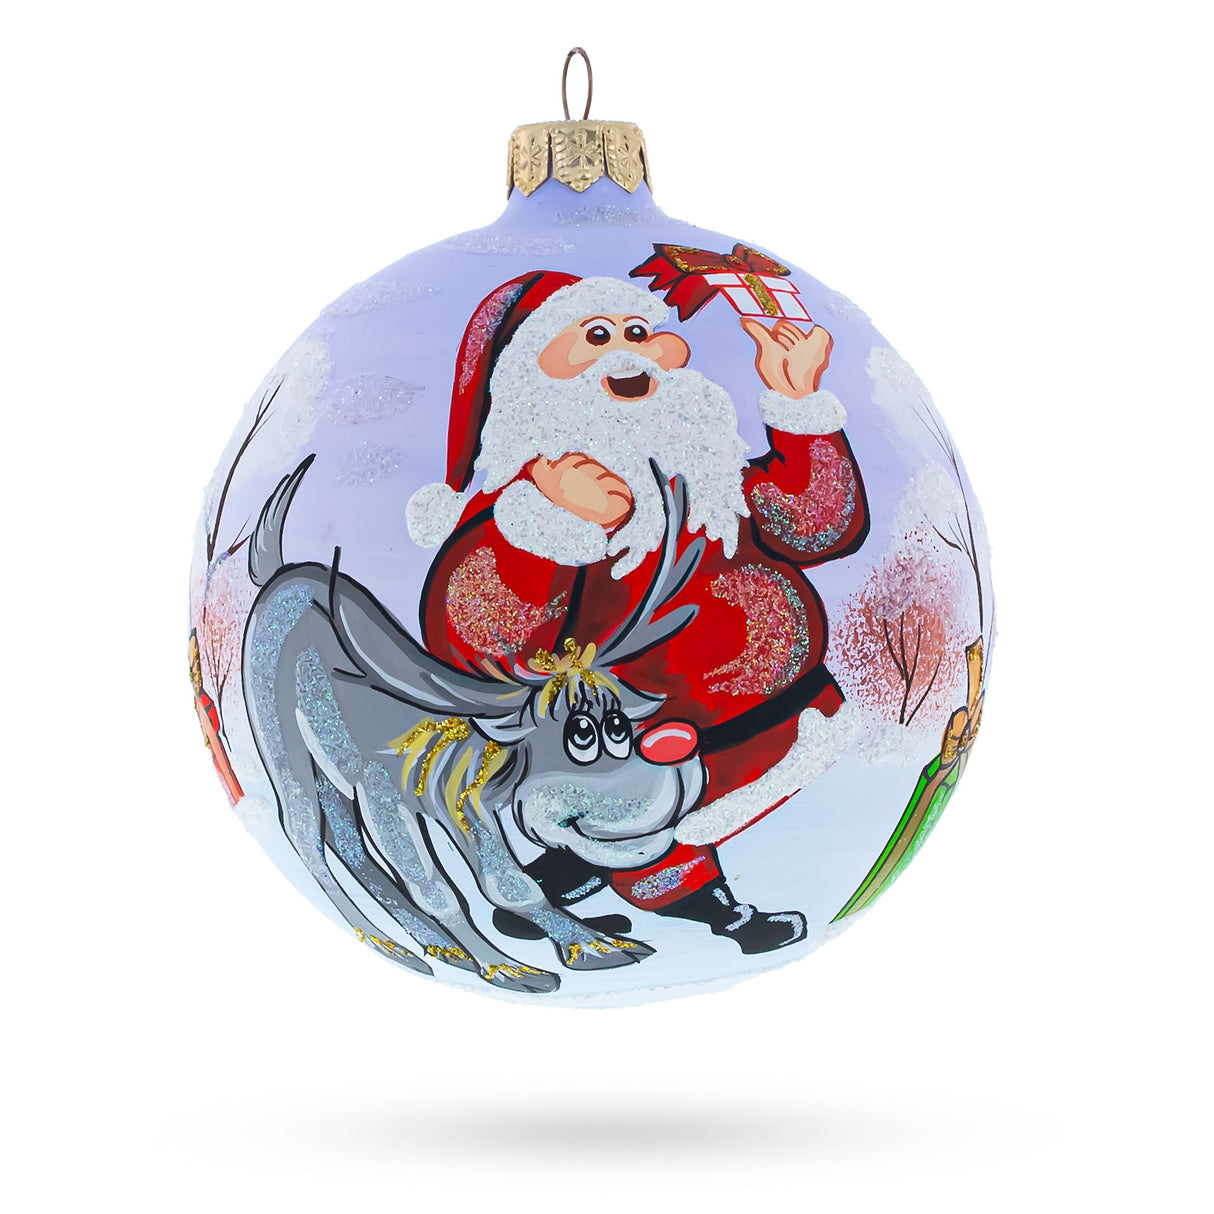 Festive Trio: Santa, Reindeer, and Gifts Blown Glass Ball Christmas Ornament 4 Inches in Multi color, Round shape